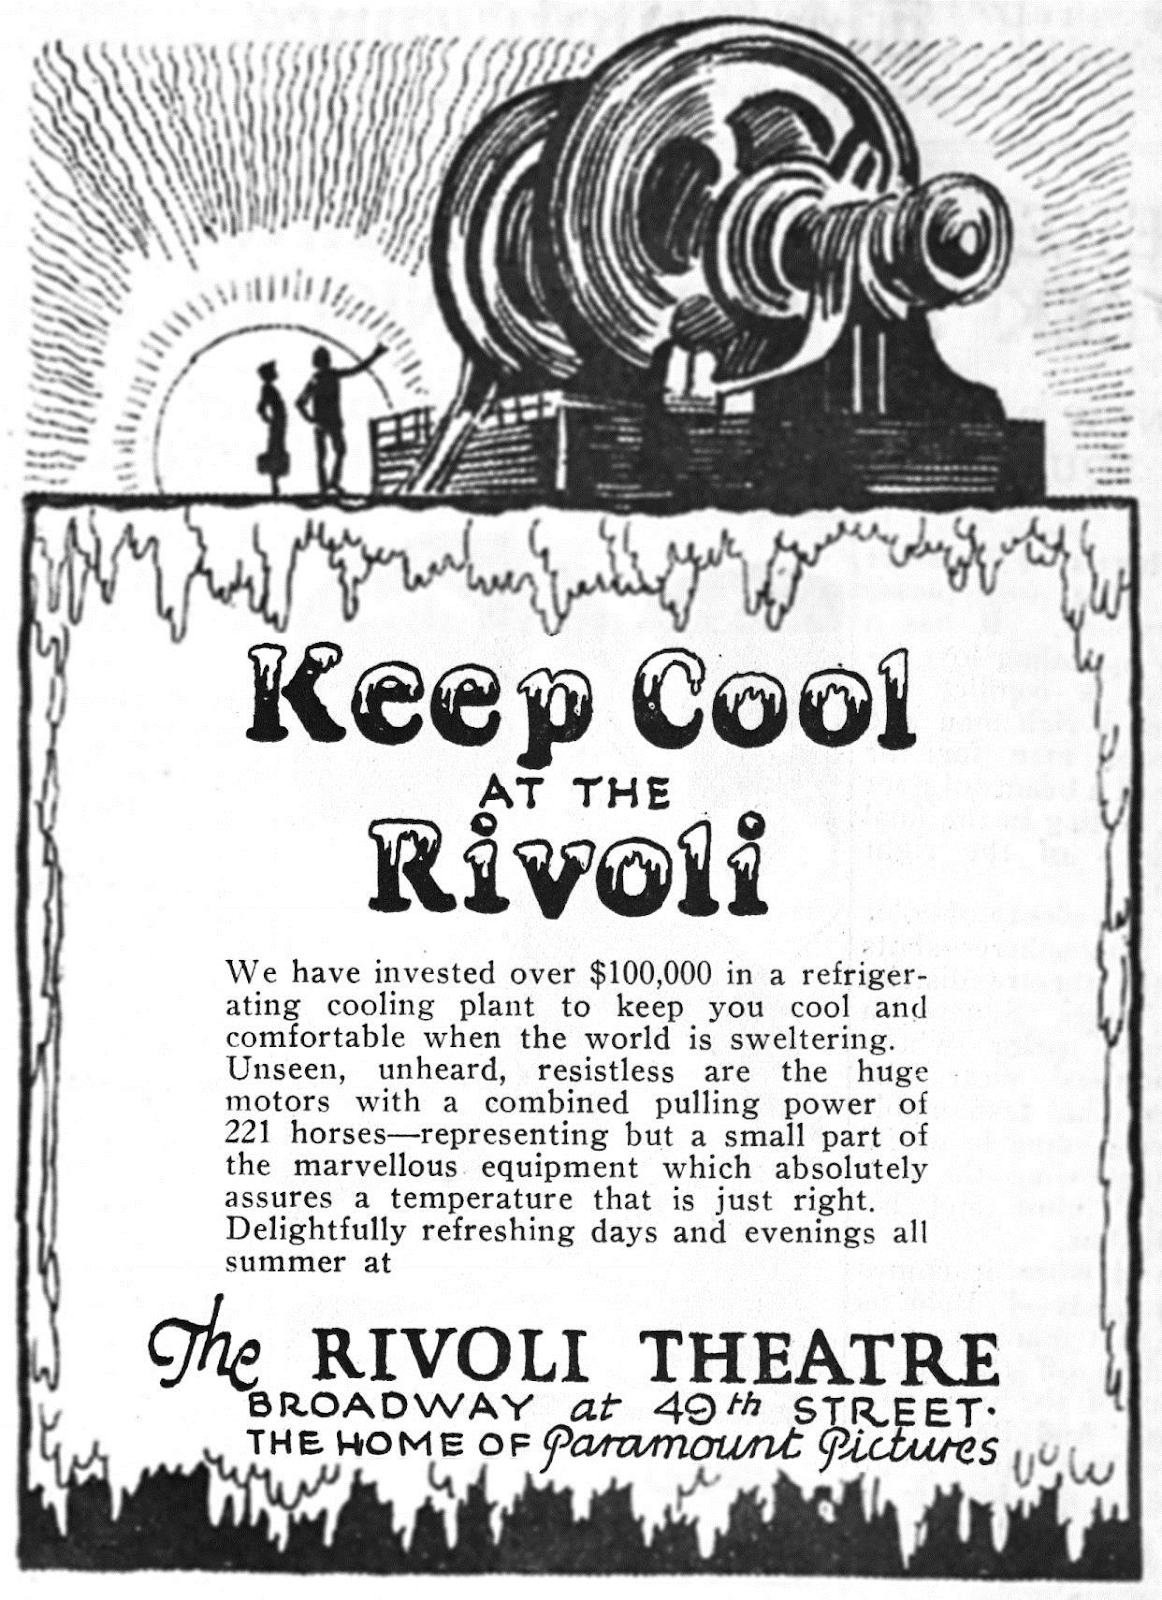 Vintage advertisement for the Rivoli Theatre depicts people marveling at a giant cooling machine and the text "Keep Cool at the Rivoli"